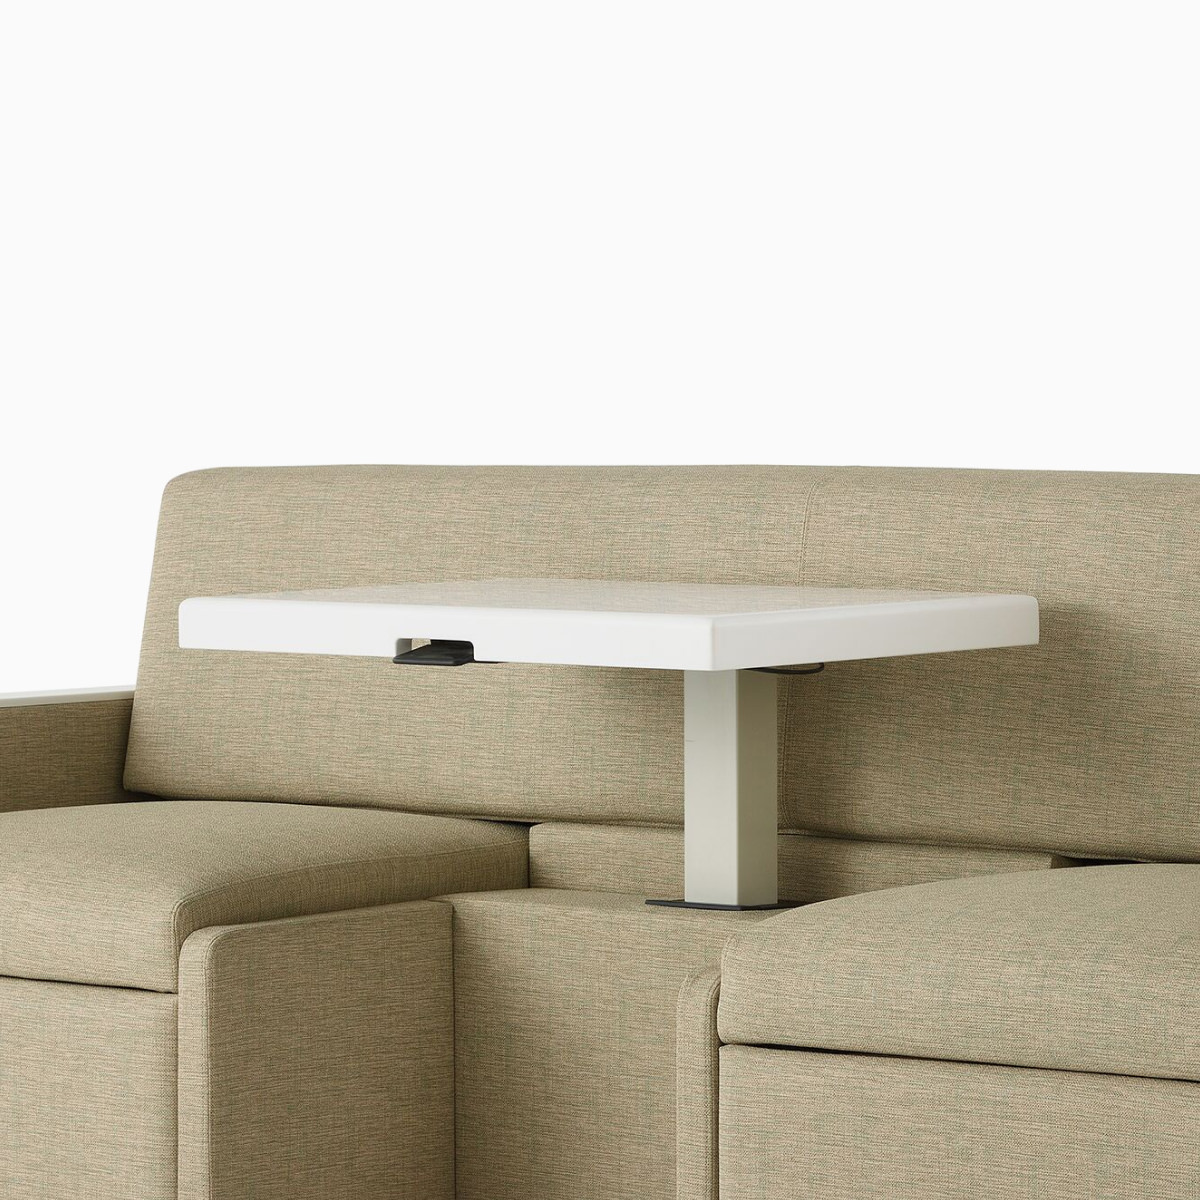 Detail of the center table on a Nemschoff Merge 2 Flop Sofa.